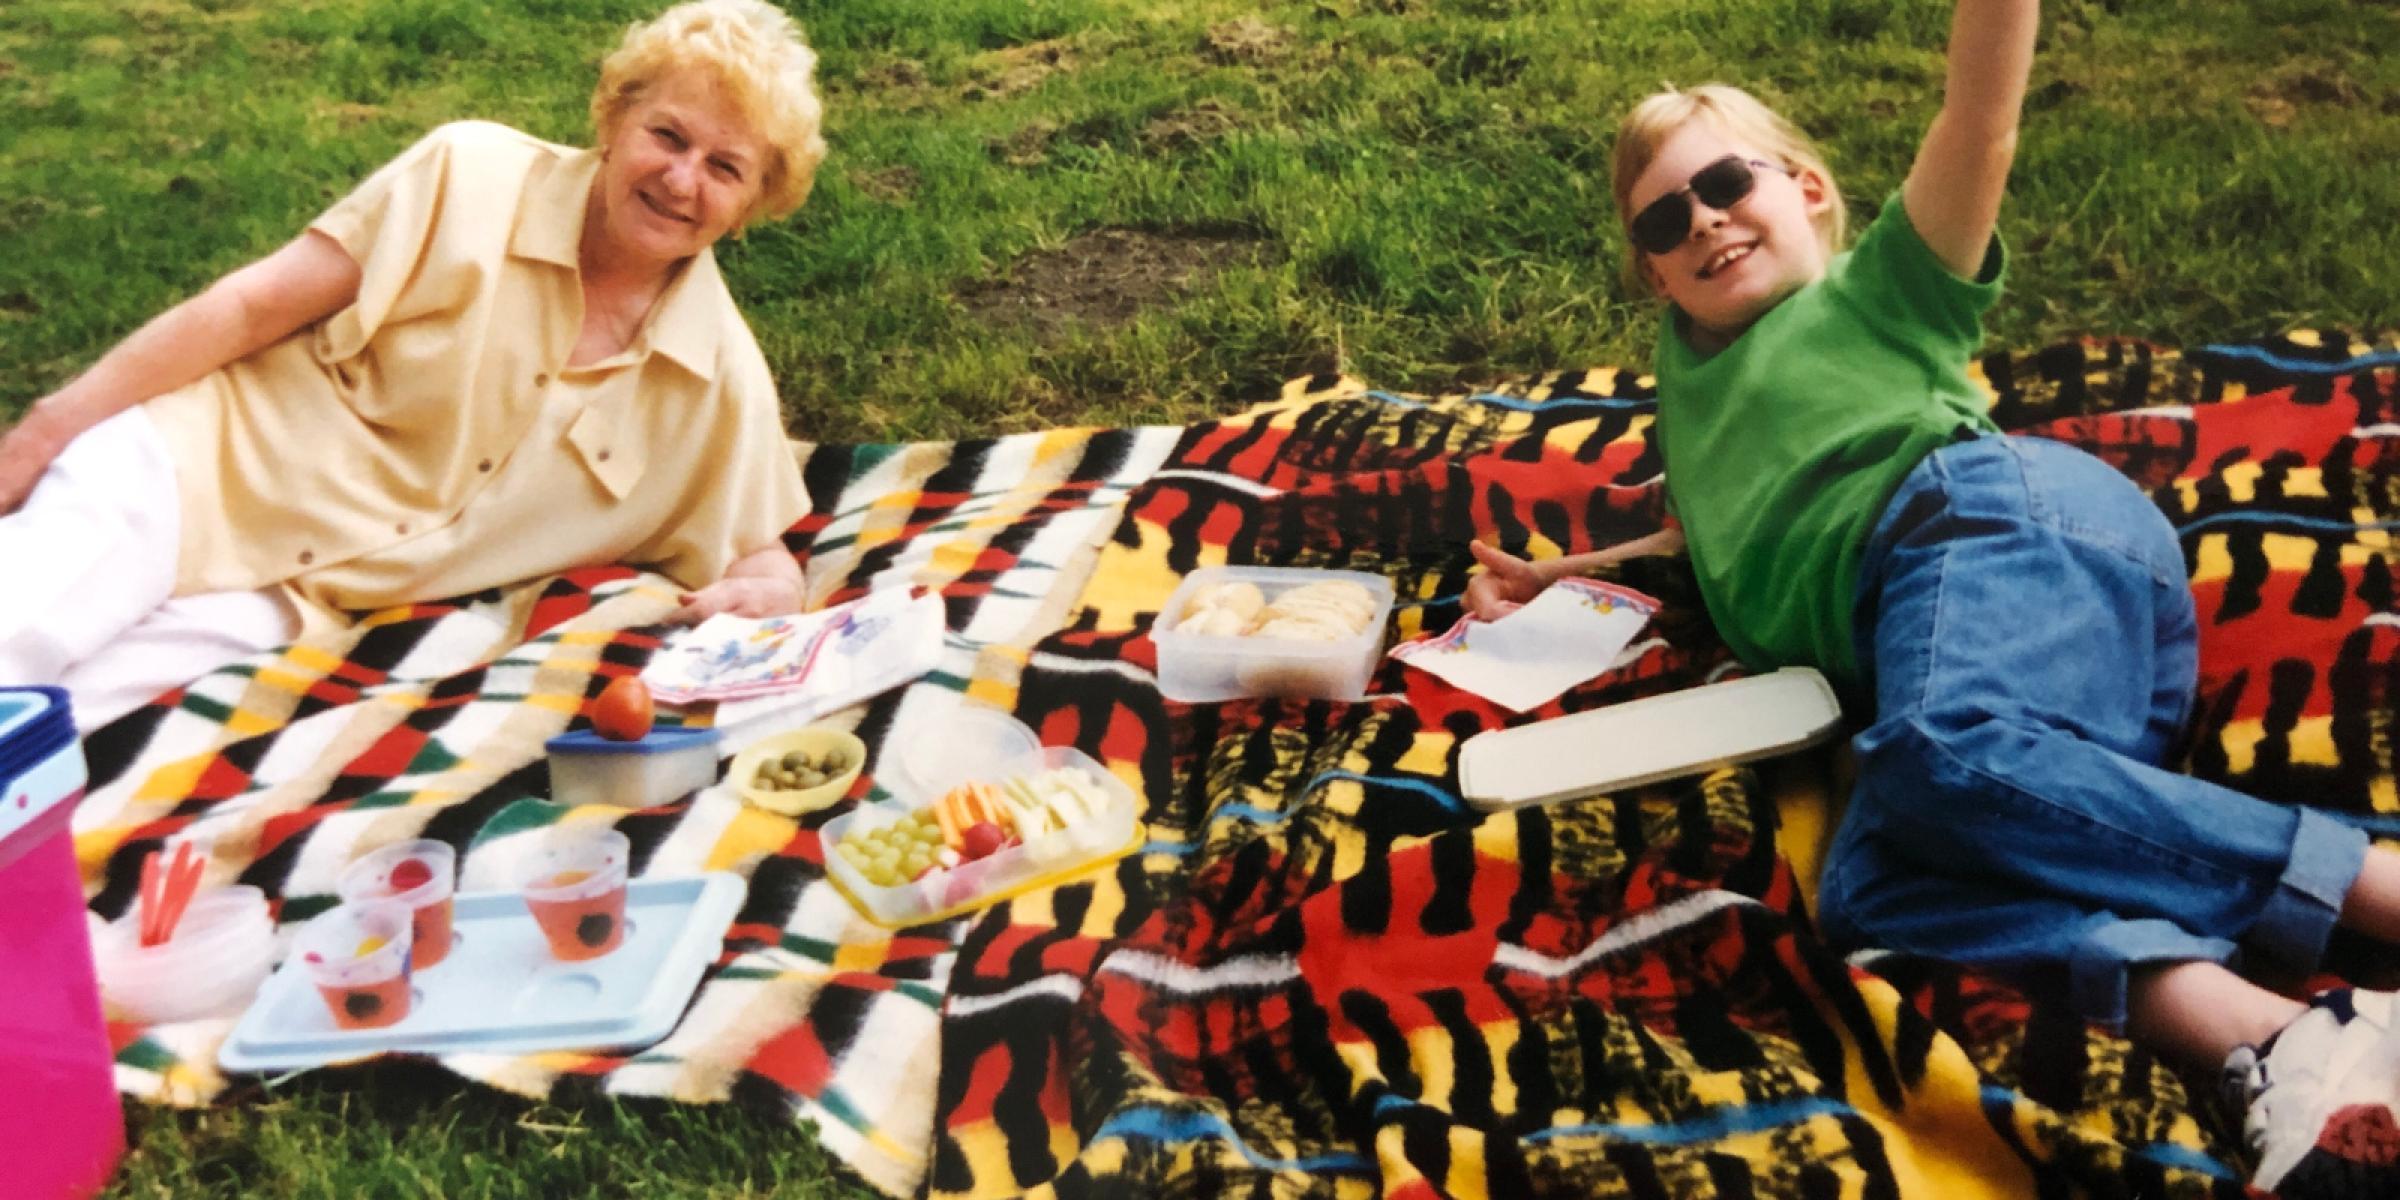 Hannah with her Nanny lying on picnic blankets, waving and smiling